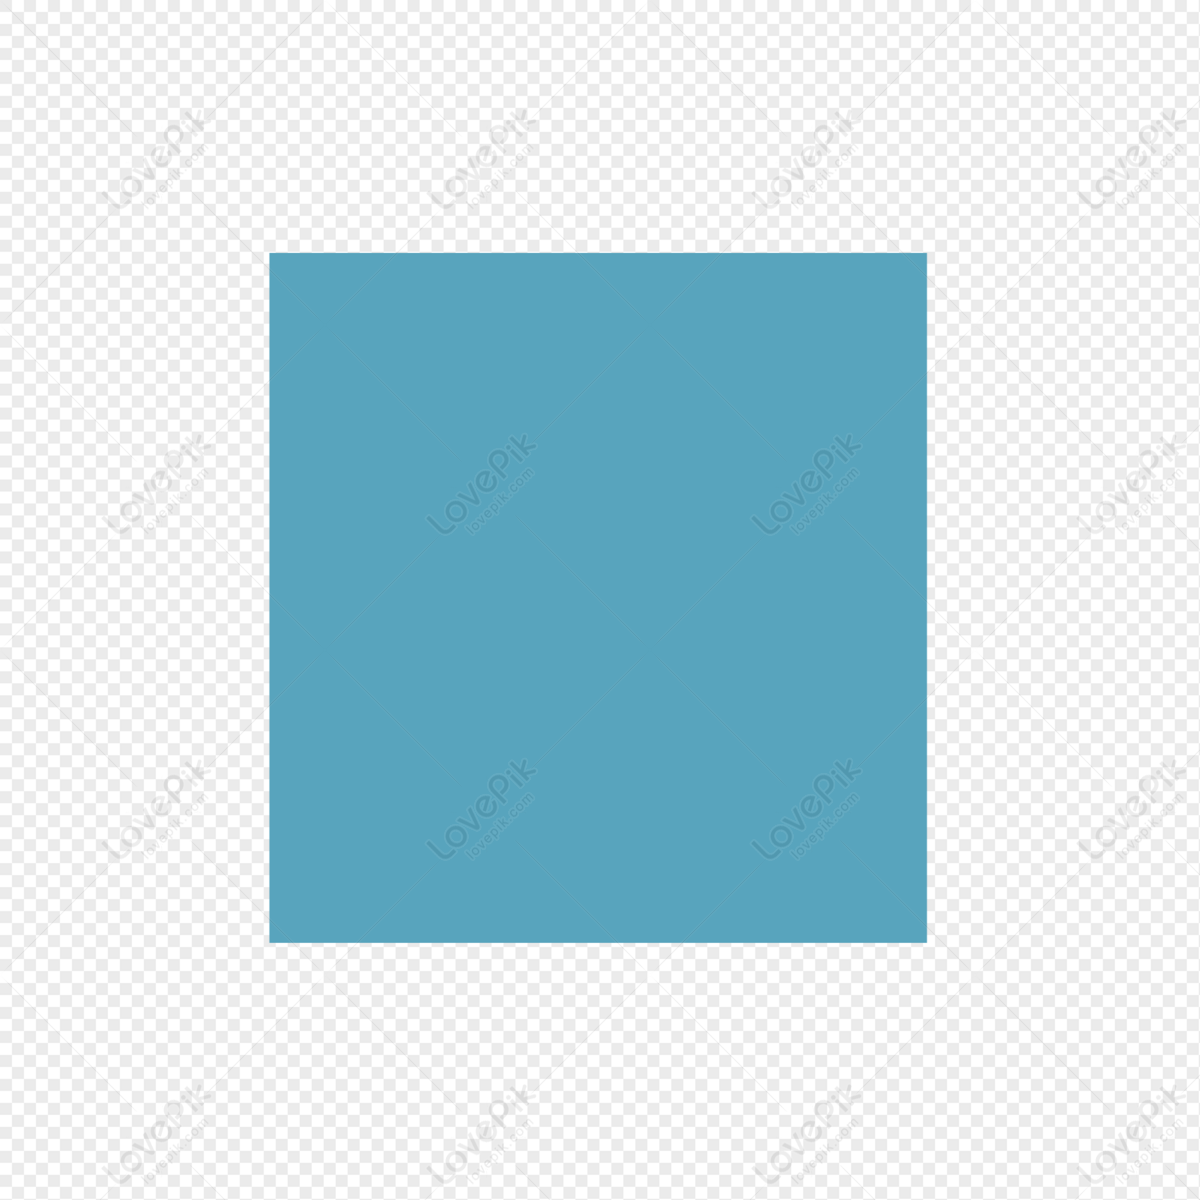 Blue Box PNG Picture And Clipart Image For Free Download - Lovepik